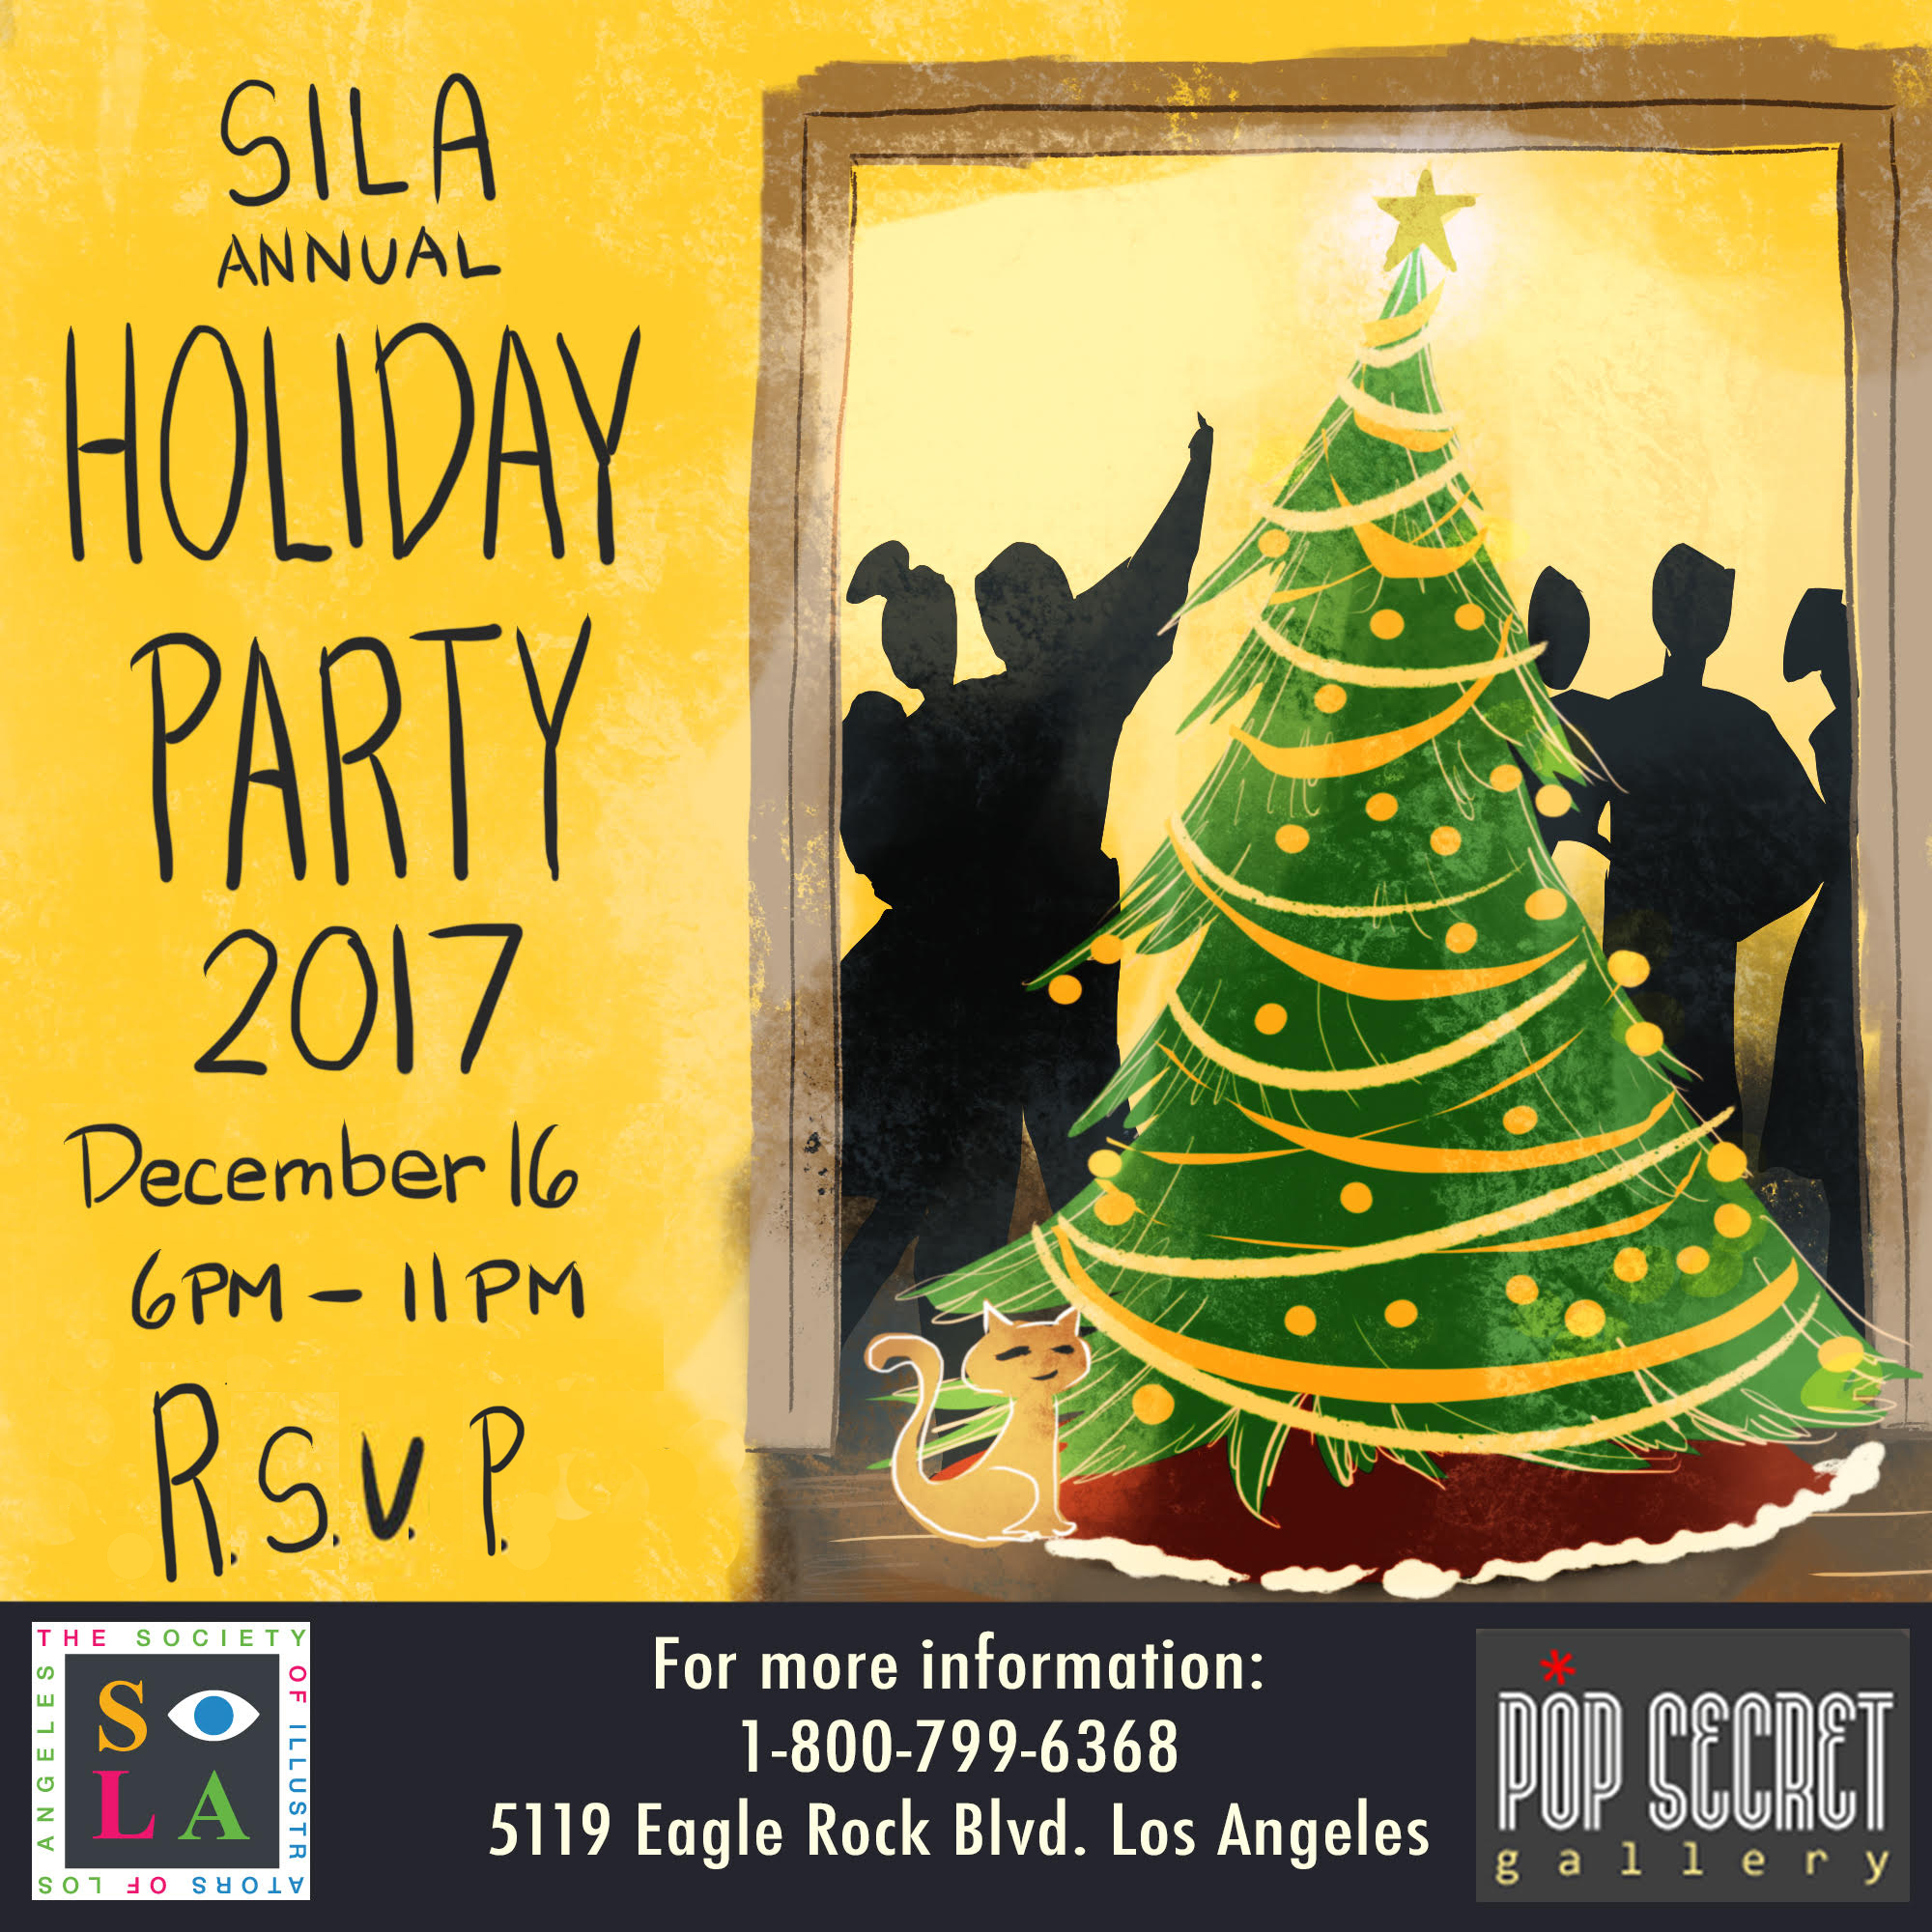 Our 2017 Holiday Party! December 16 6pm – 11pm at the Society ~ 5119 Eagle Rock Blvd. Los Angeles